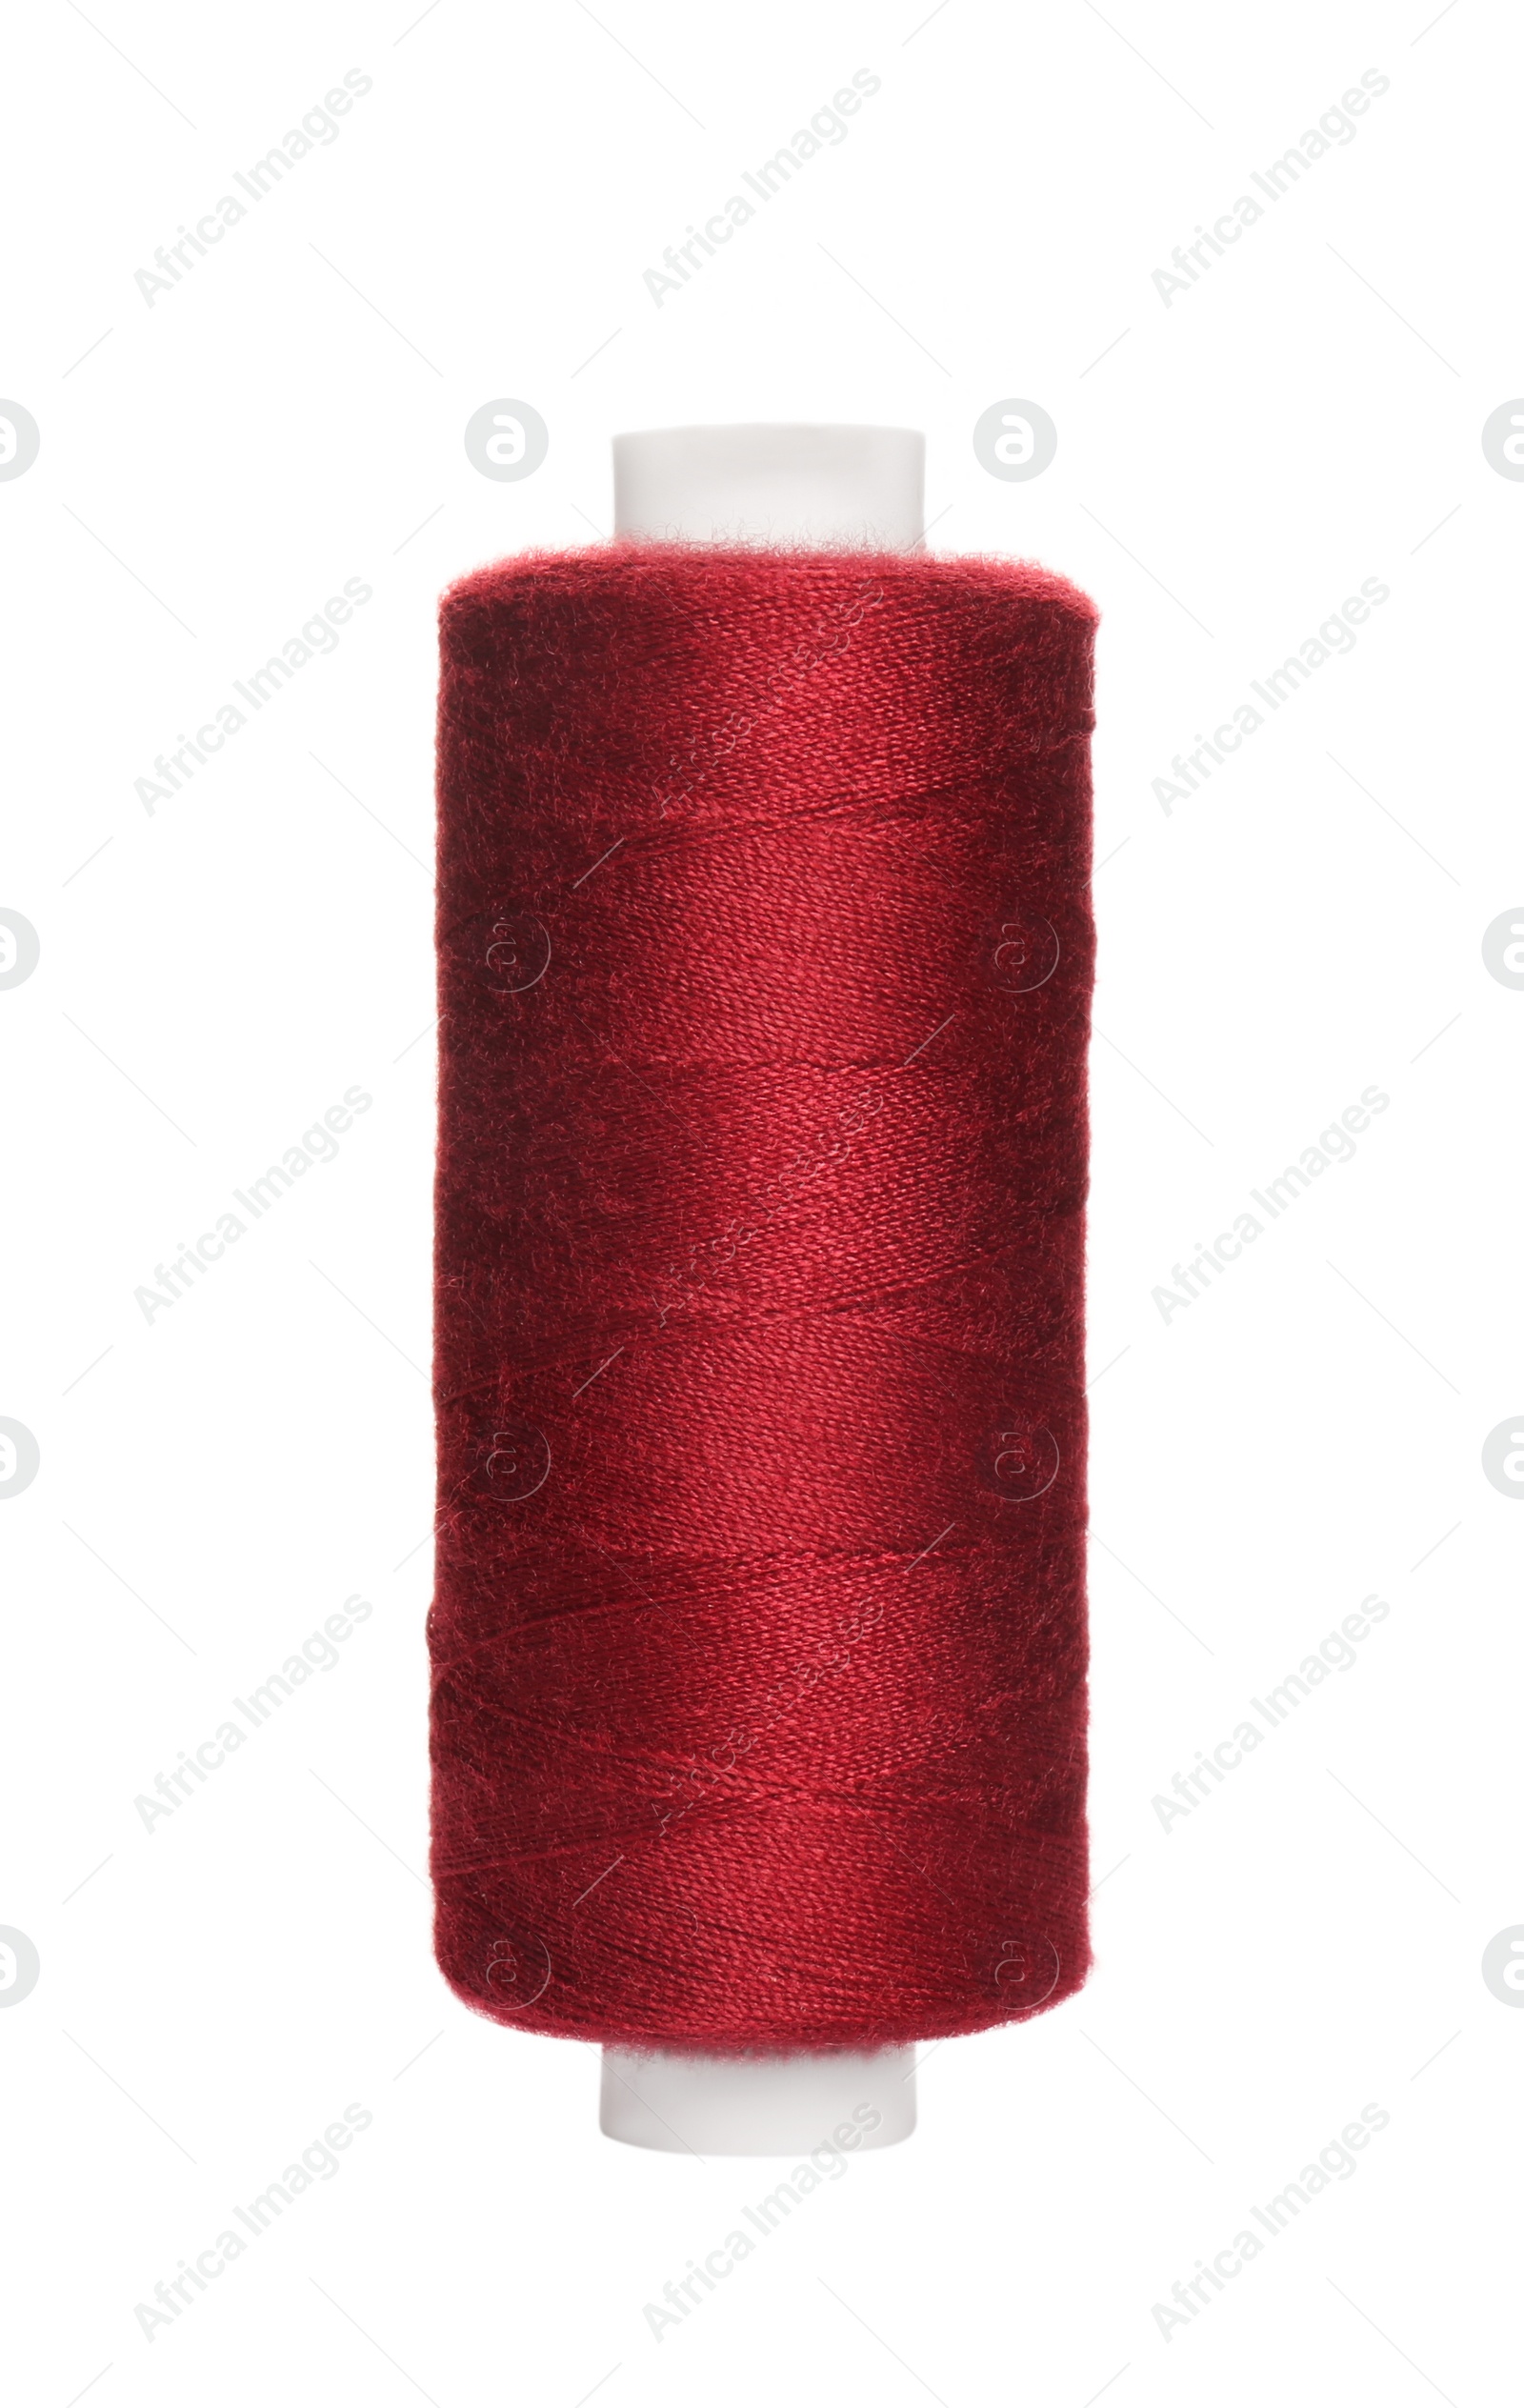 Photo of Spool of burgundy sewing thread isolated on white